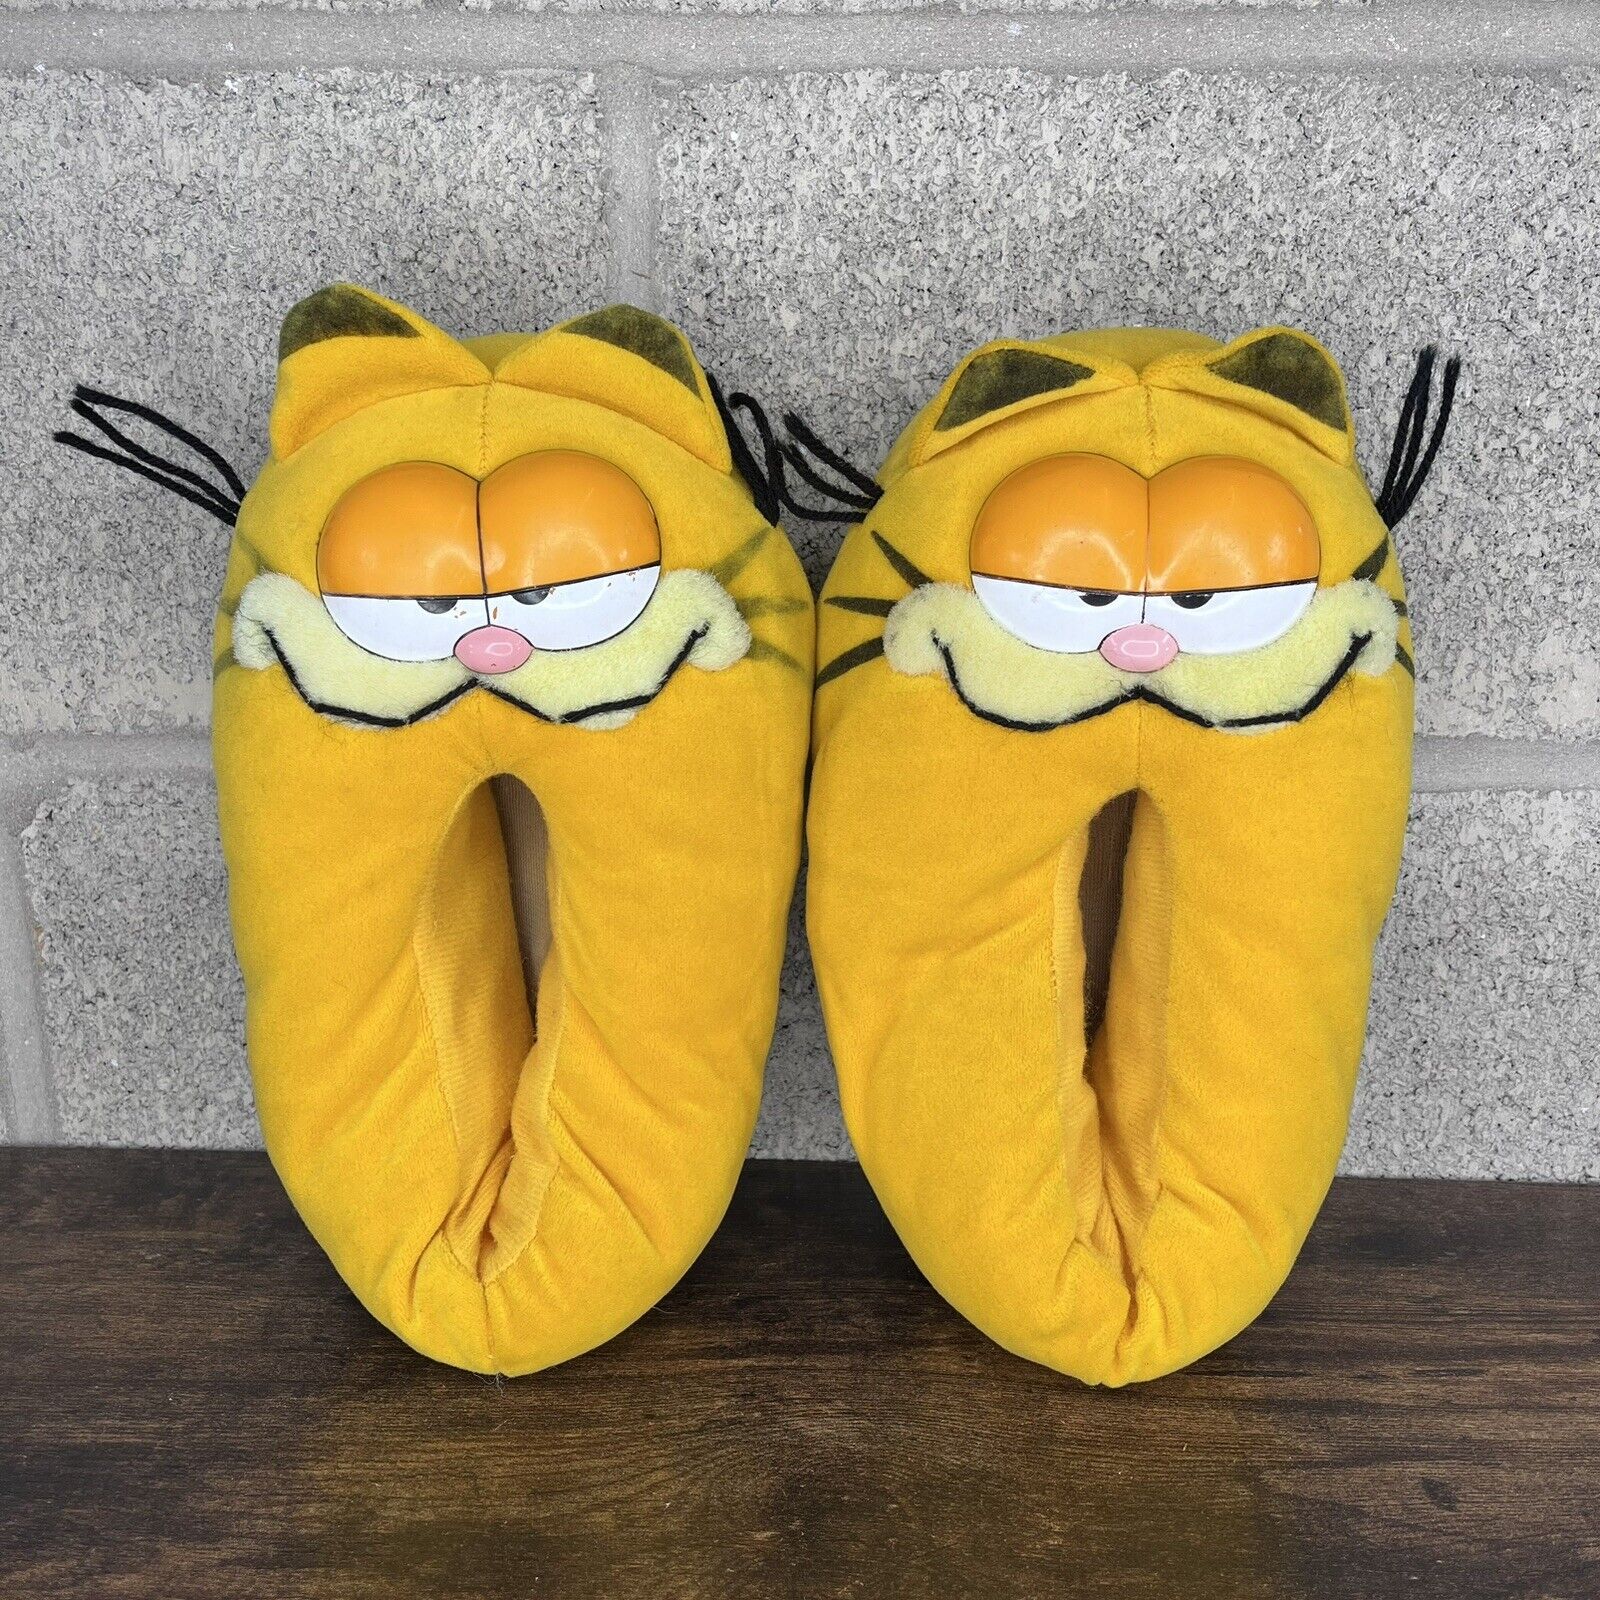 Vintage Garfield Slippers 100% Pure Garfield 1978 Size L 9-10 Fits Most